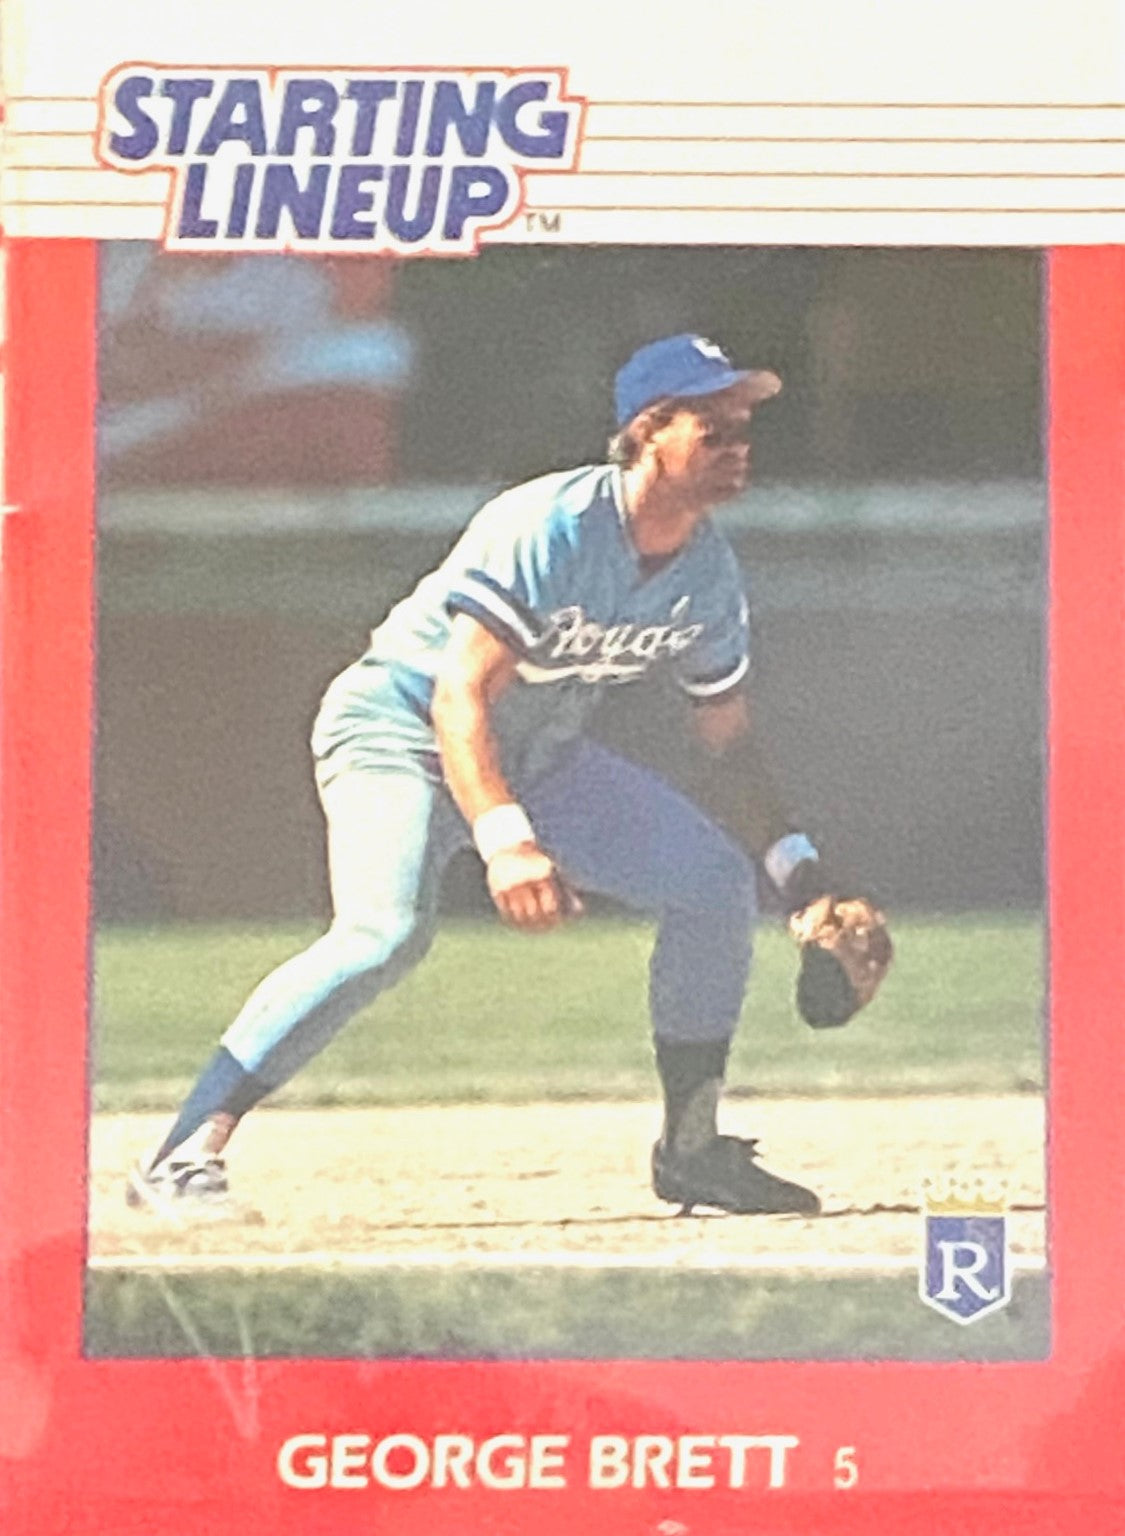 George Brett 1988 Kansas City Royals MLB Starting Lineup Figurine and Player Card by Kenner